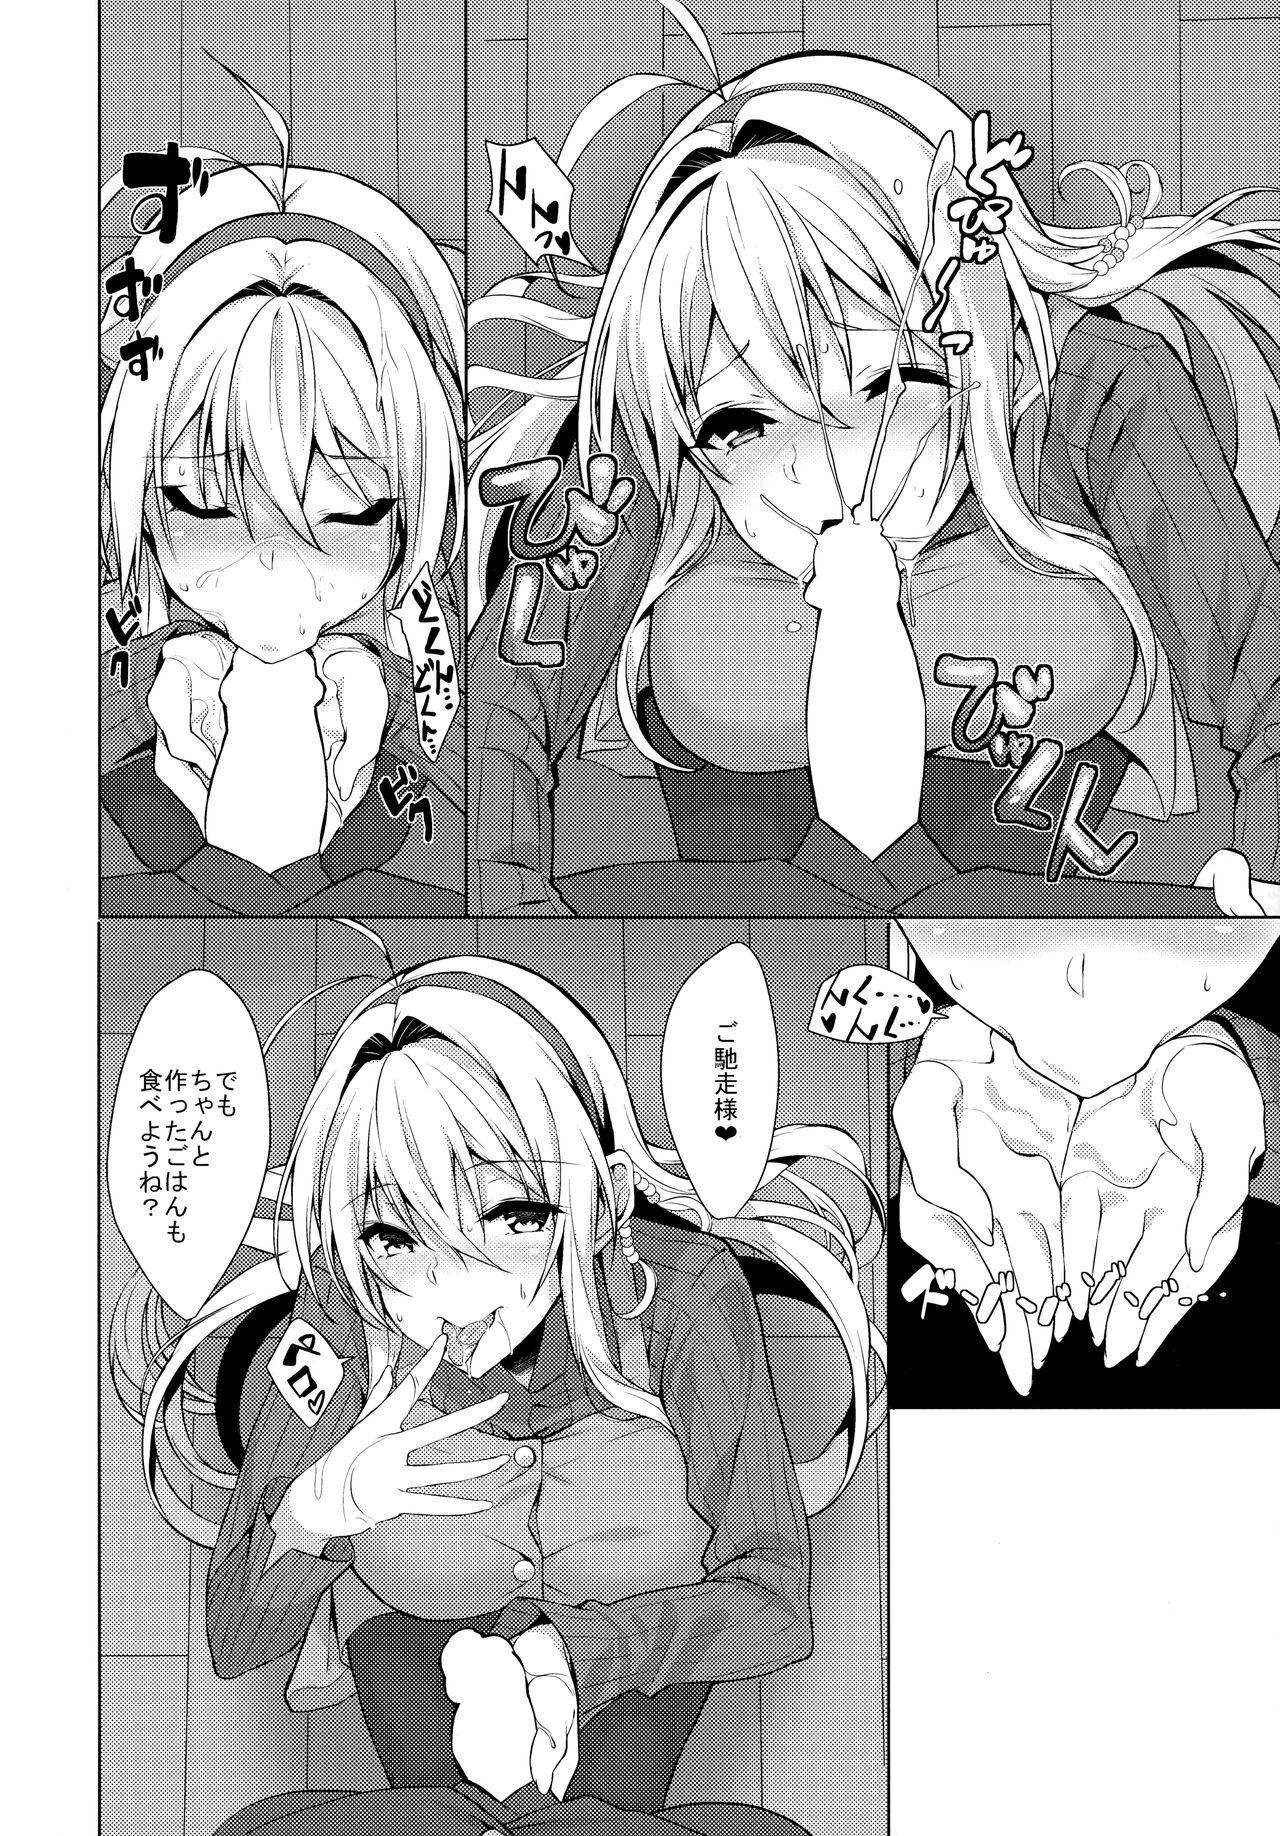 Special Locations 恋人は弦巻マキさん - Voiceroid Caliente - Page 7